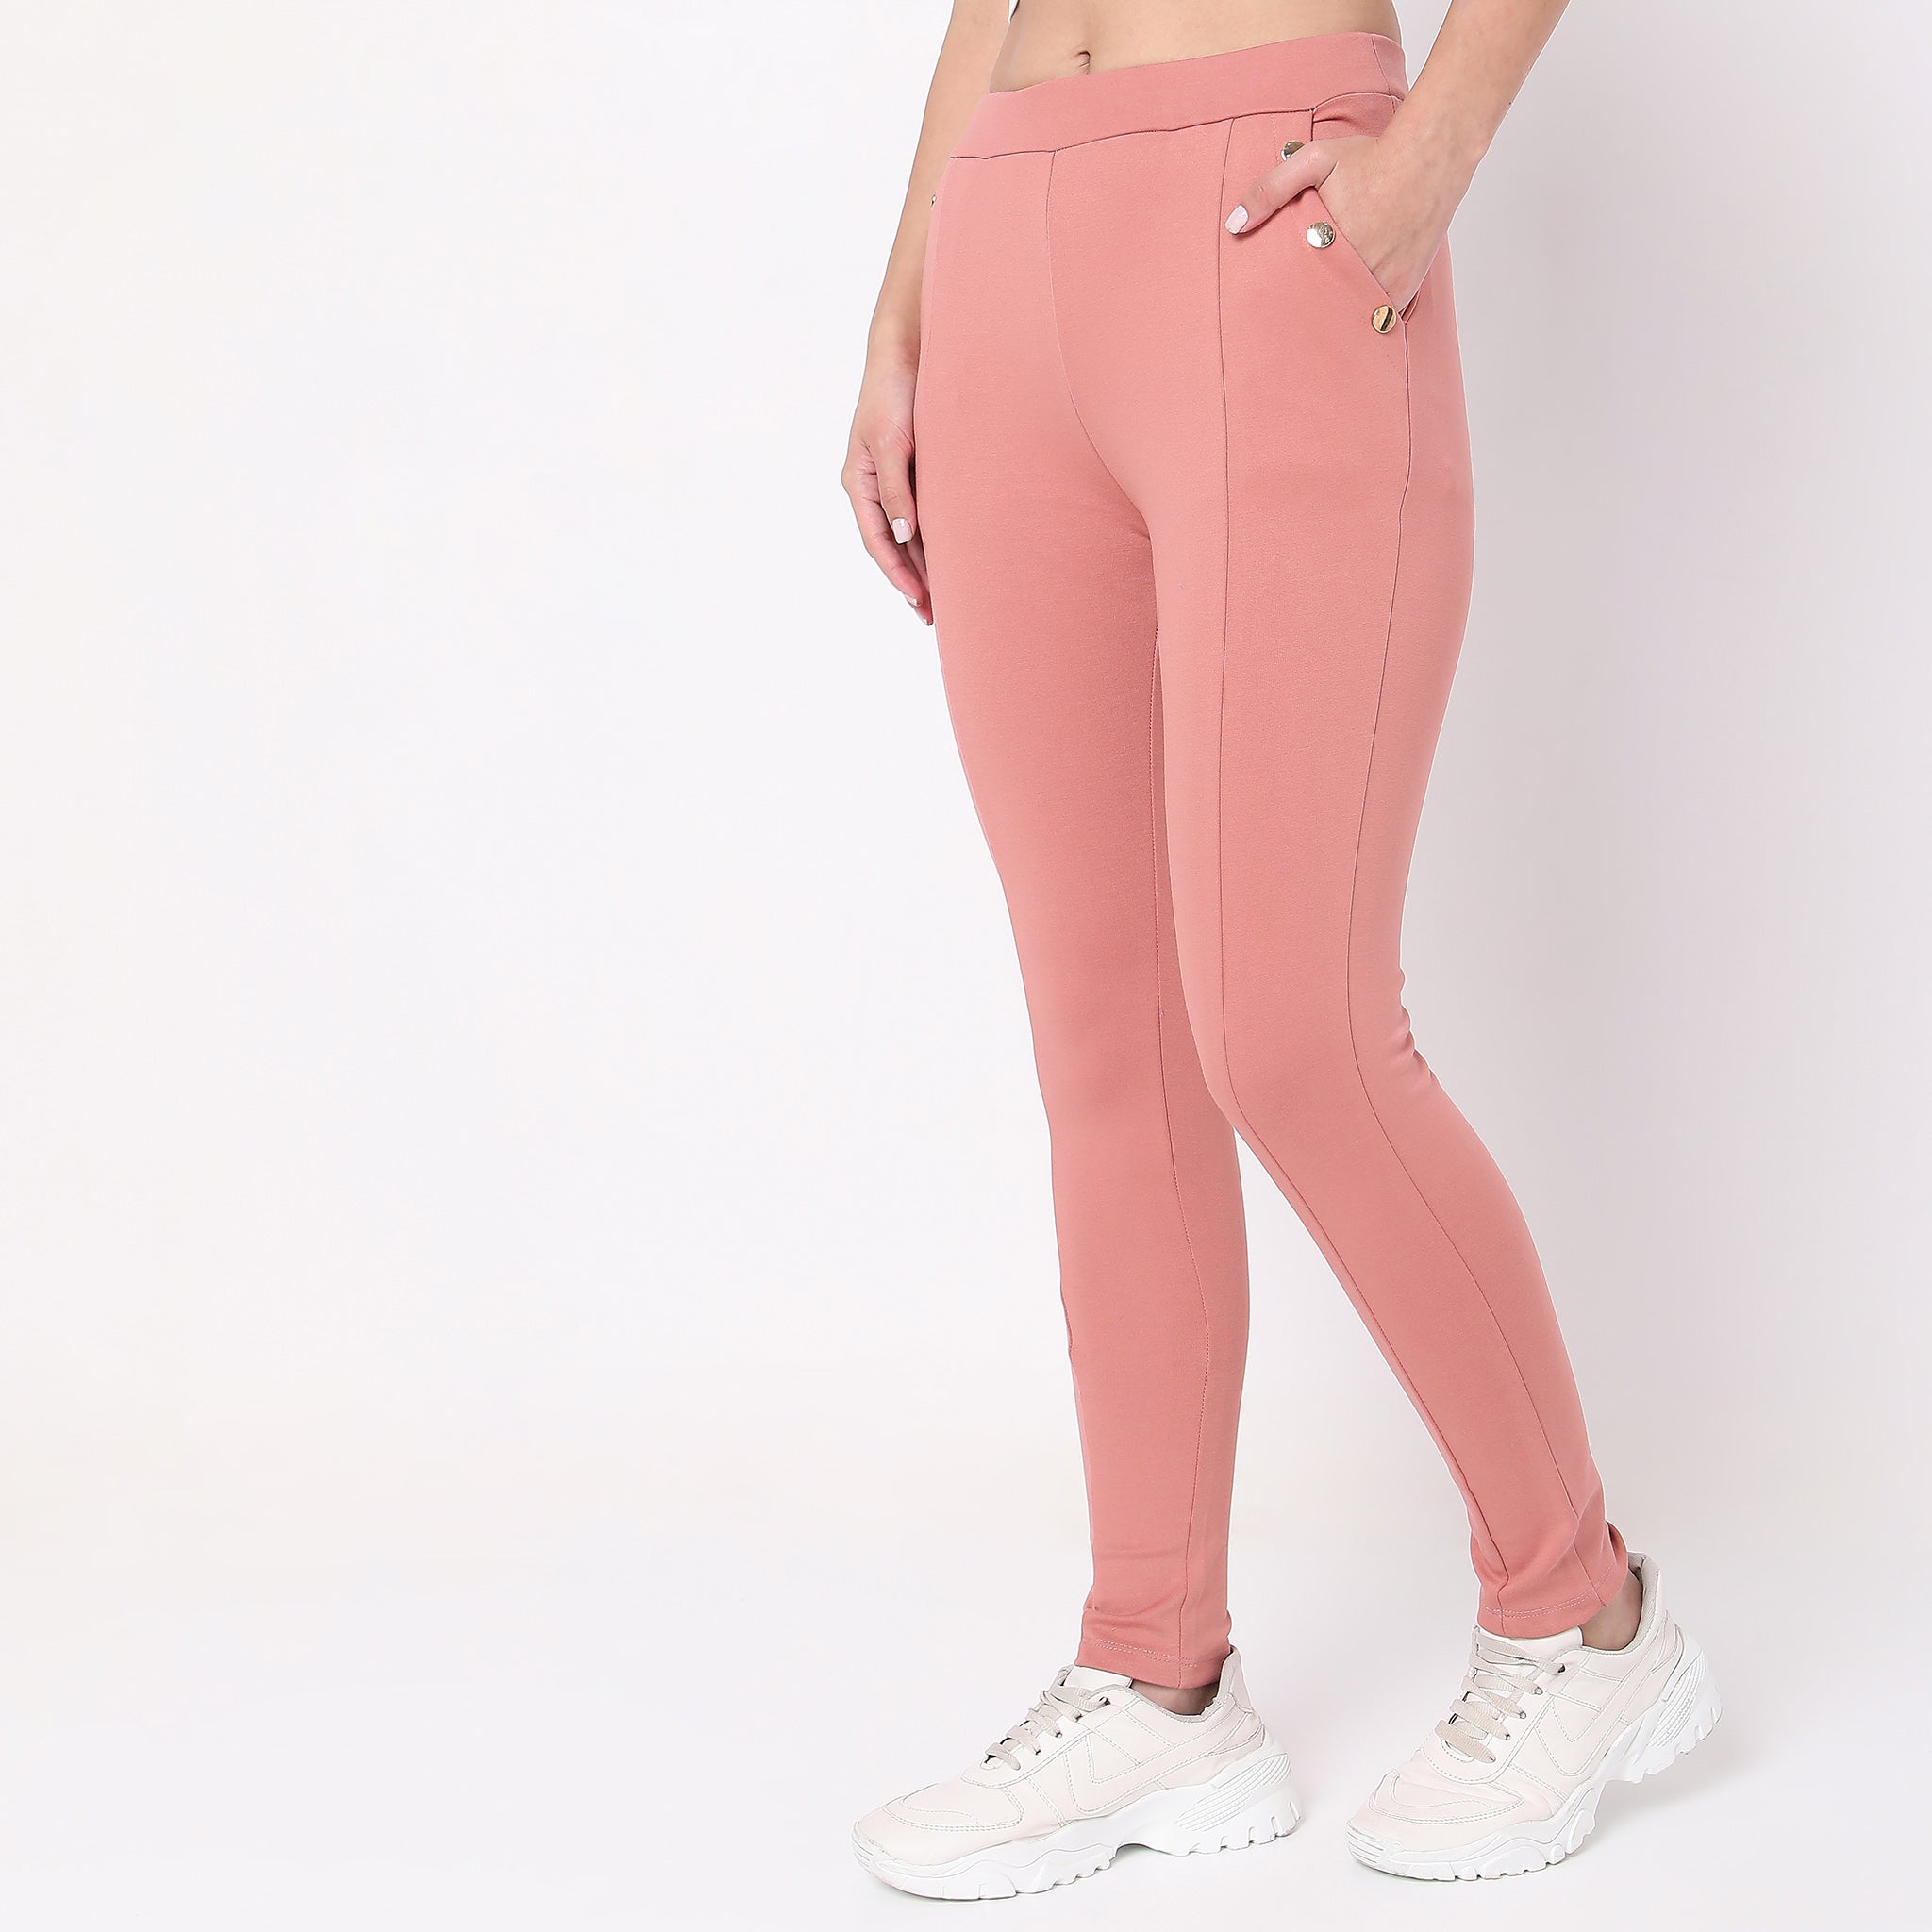 Women Wearing Slim Fit Solid Mid Rise Jeggings